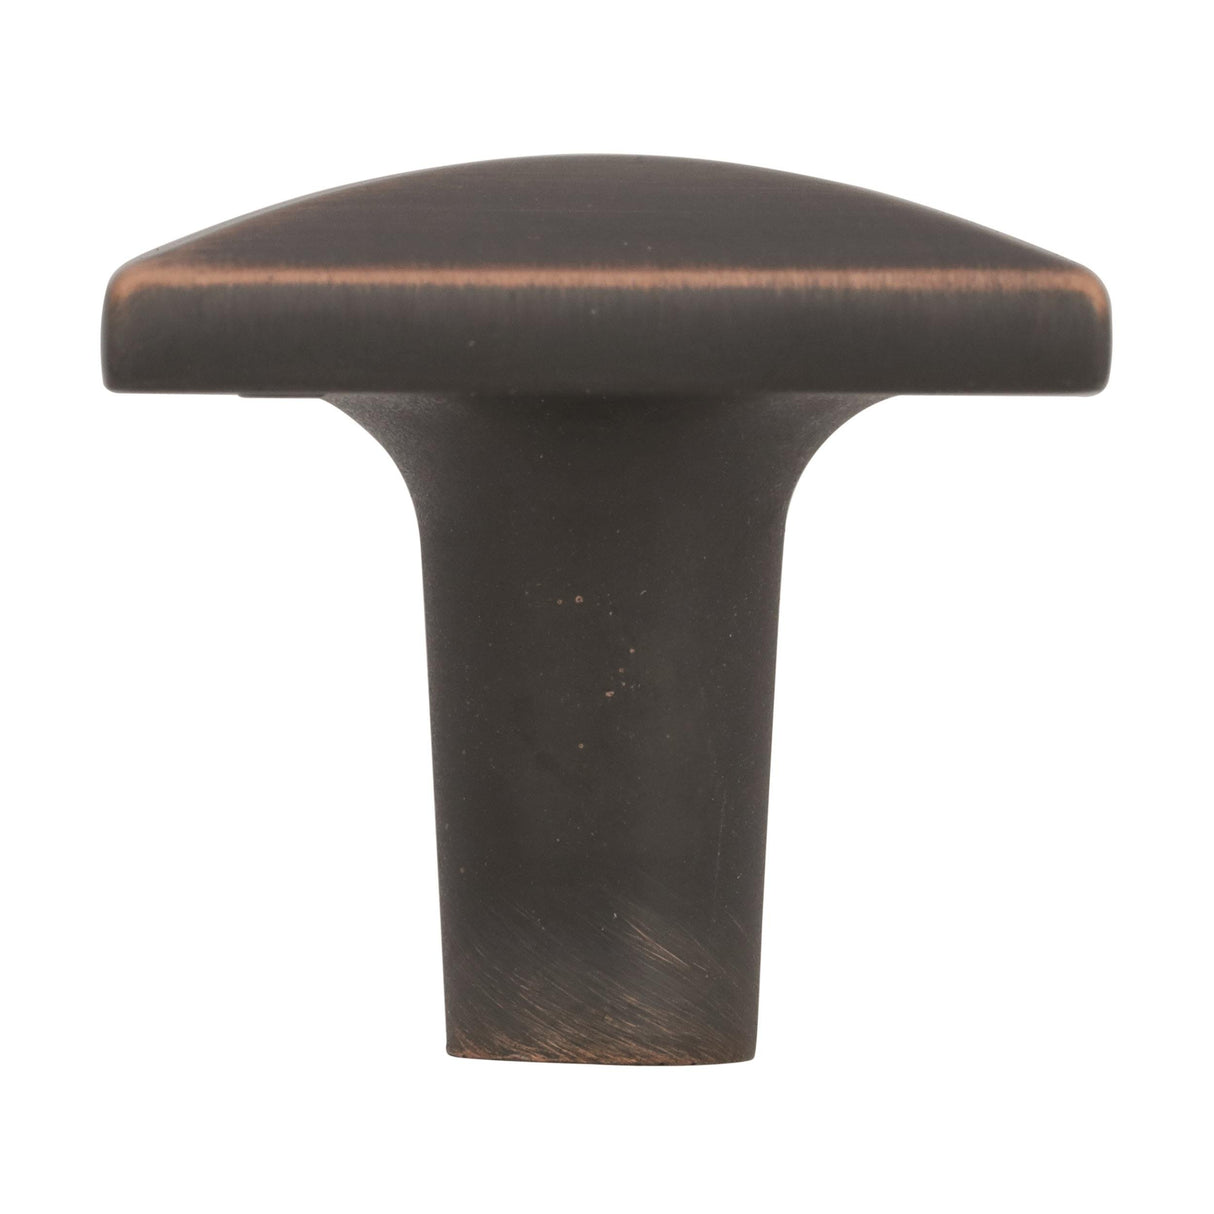 Amerock Cabinet Knob Oil Rubbed Bronze 1-1/8 inch (29 mm) Length Extensity 1 Pack Drawer Knob Cabinet Hardware